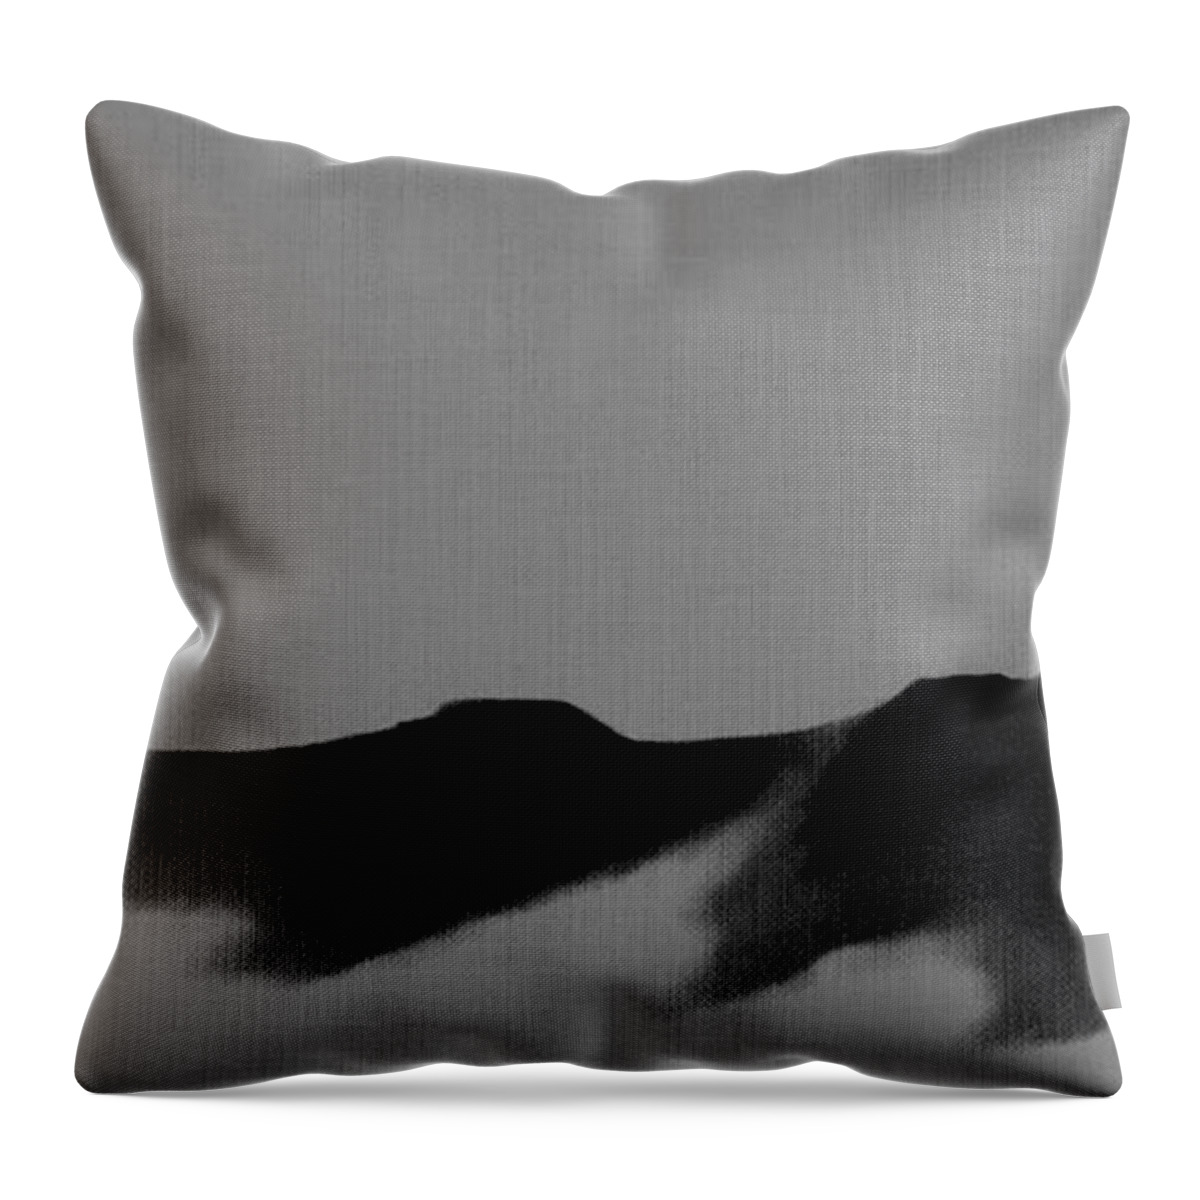  Throw Pillow featuring the painting Sand Drifts Number 5 by Diane Strain